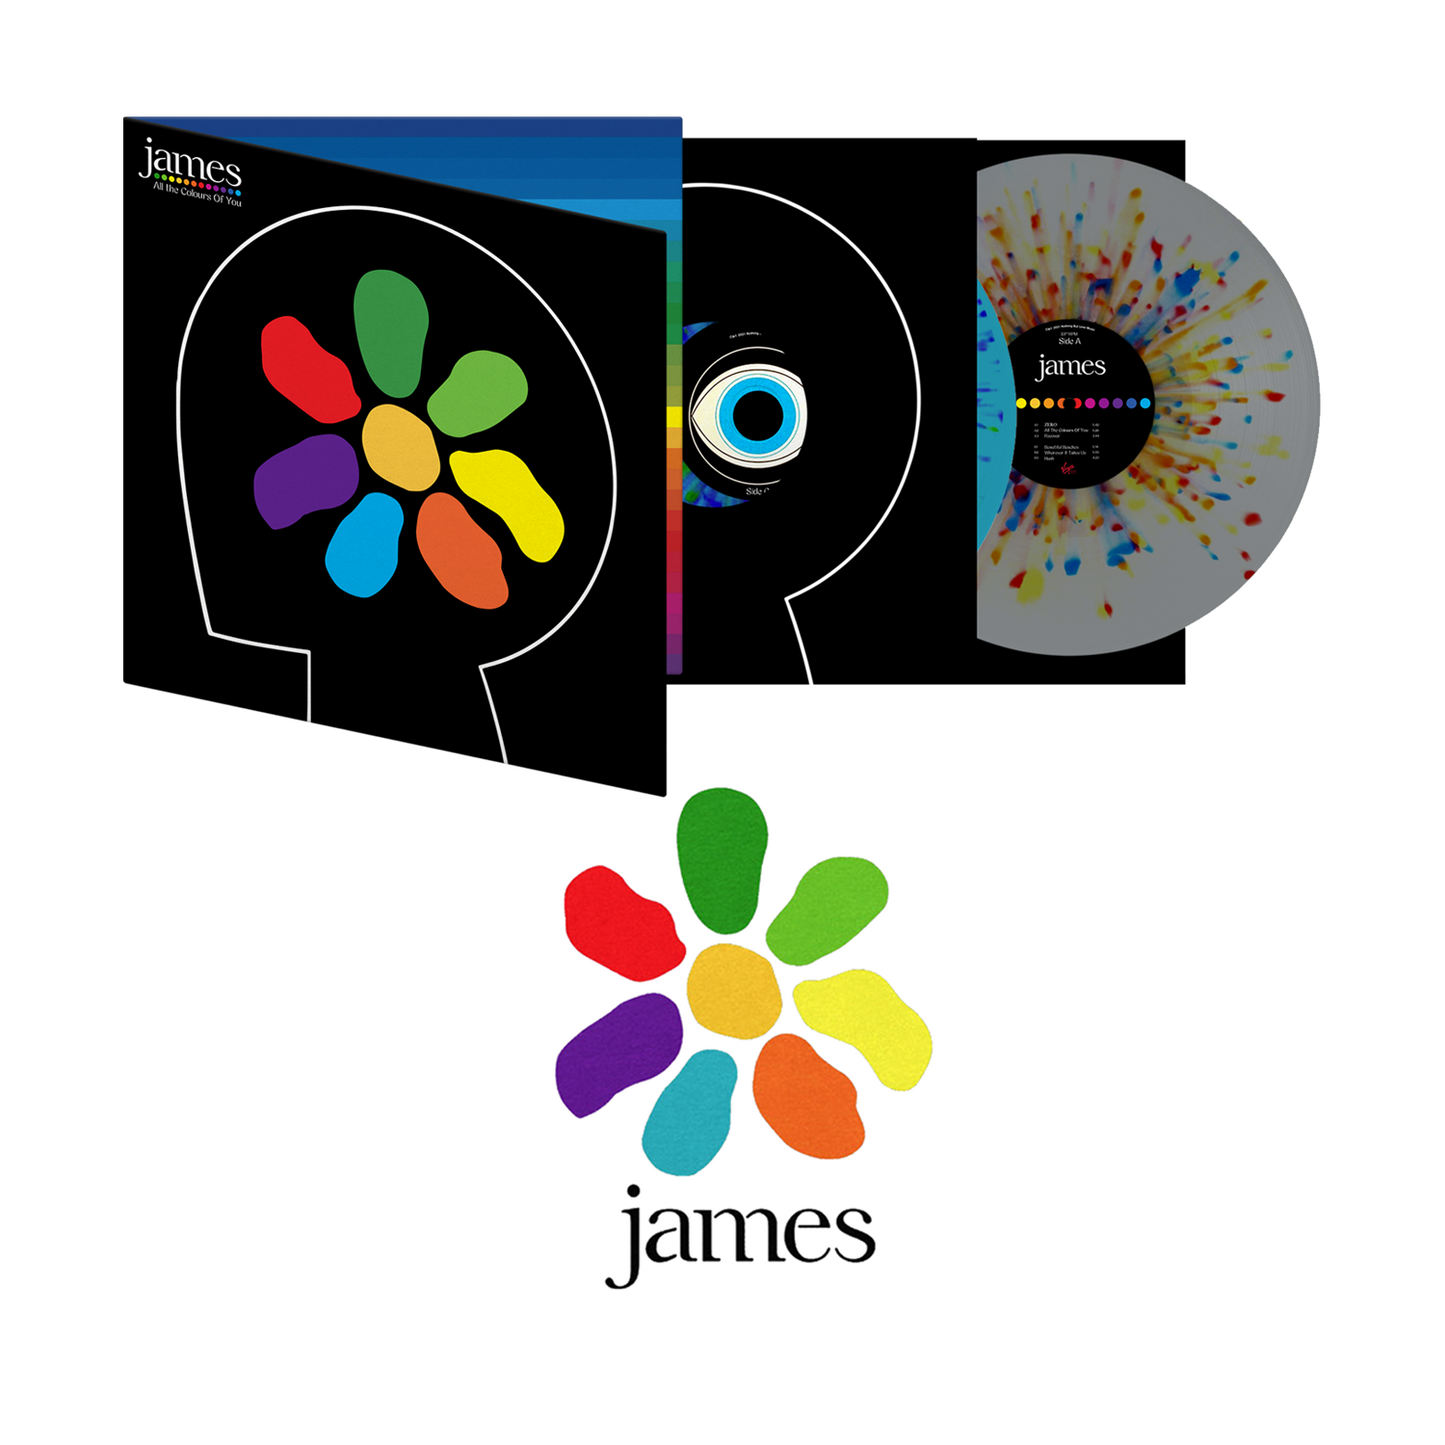 James: All The Colours Of You - Splatter Vinyl Limited Edition Double LP